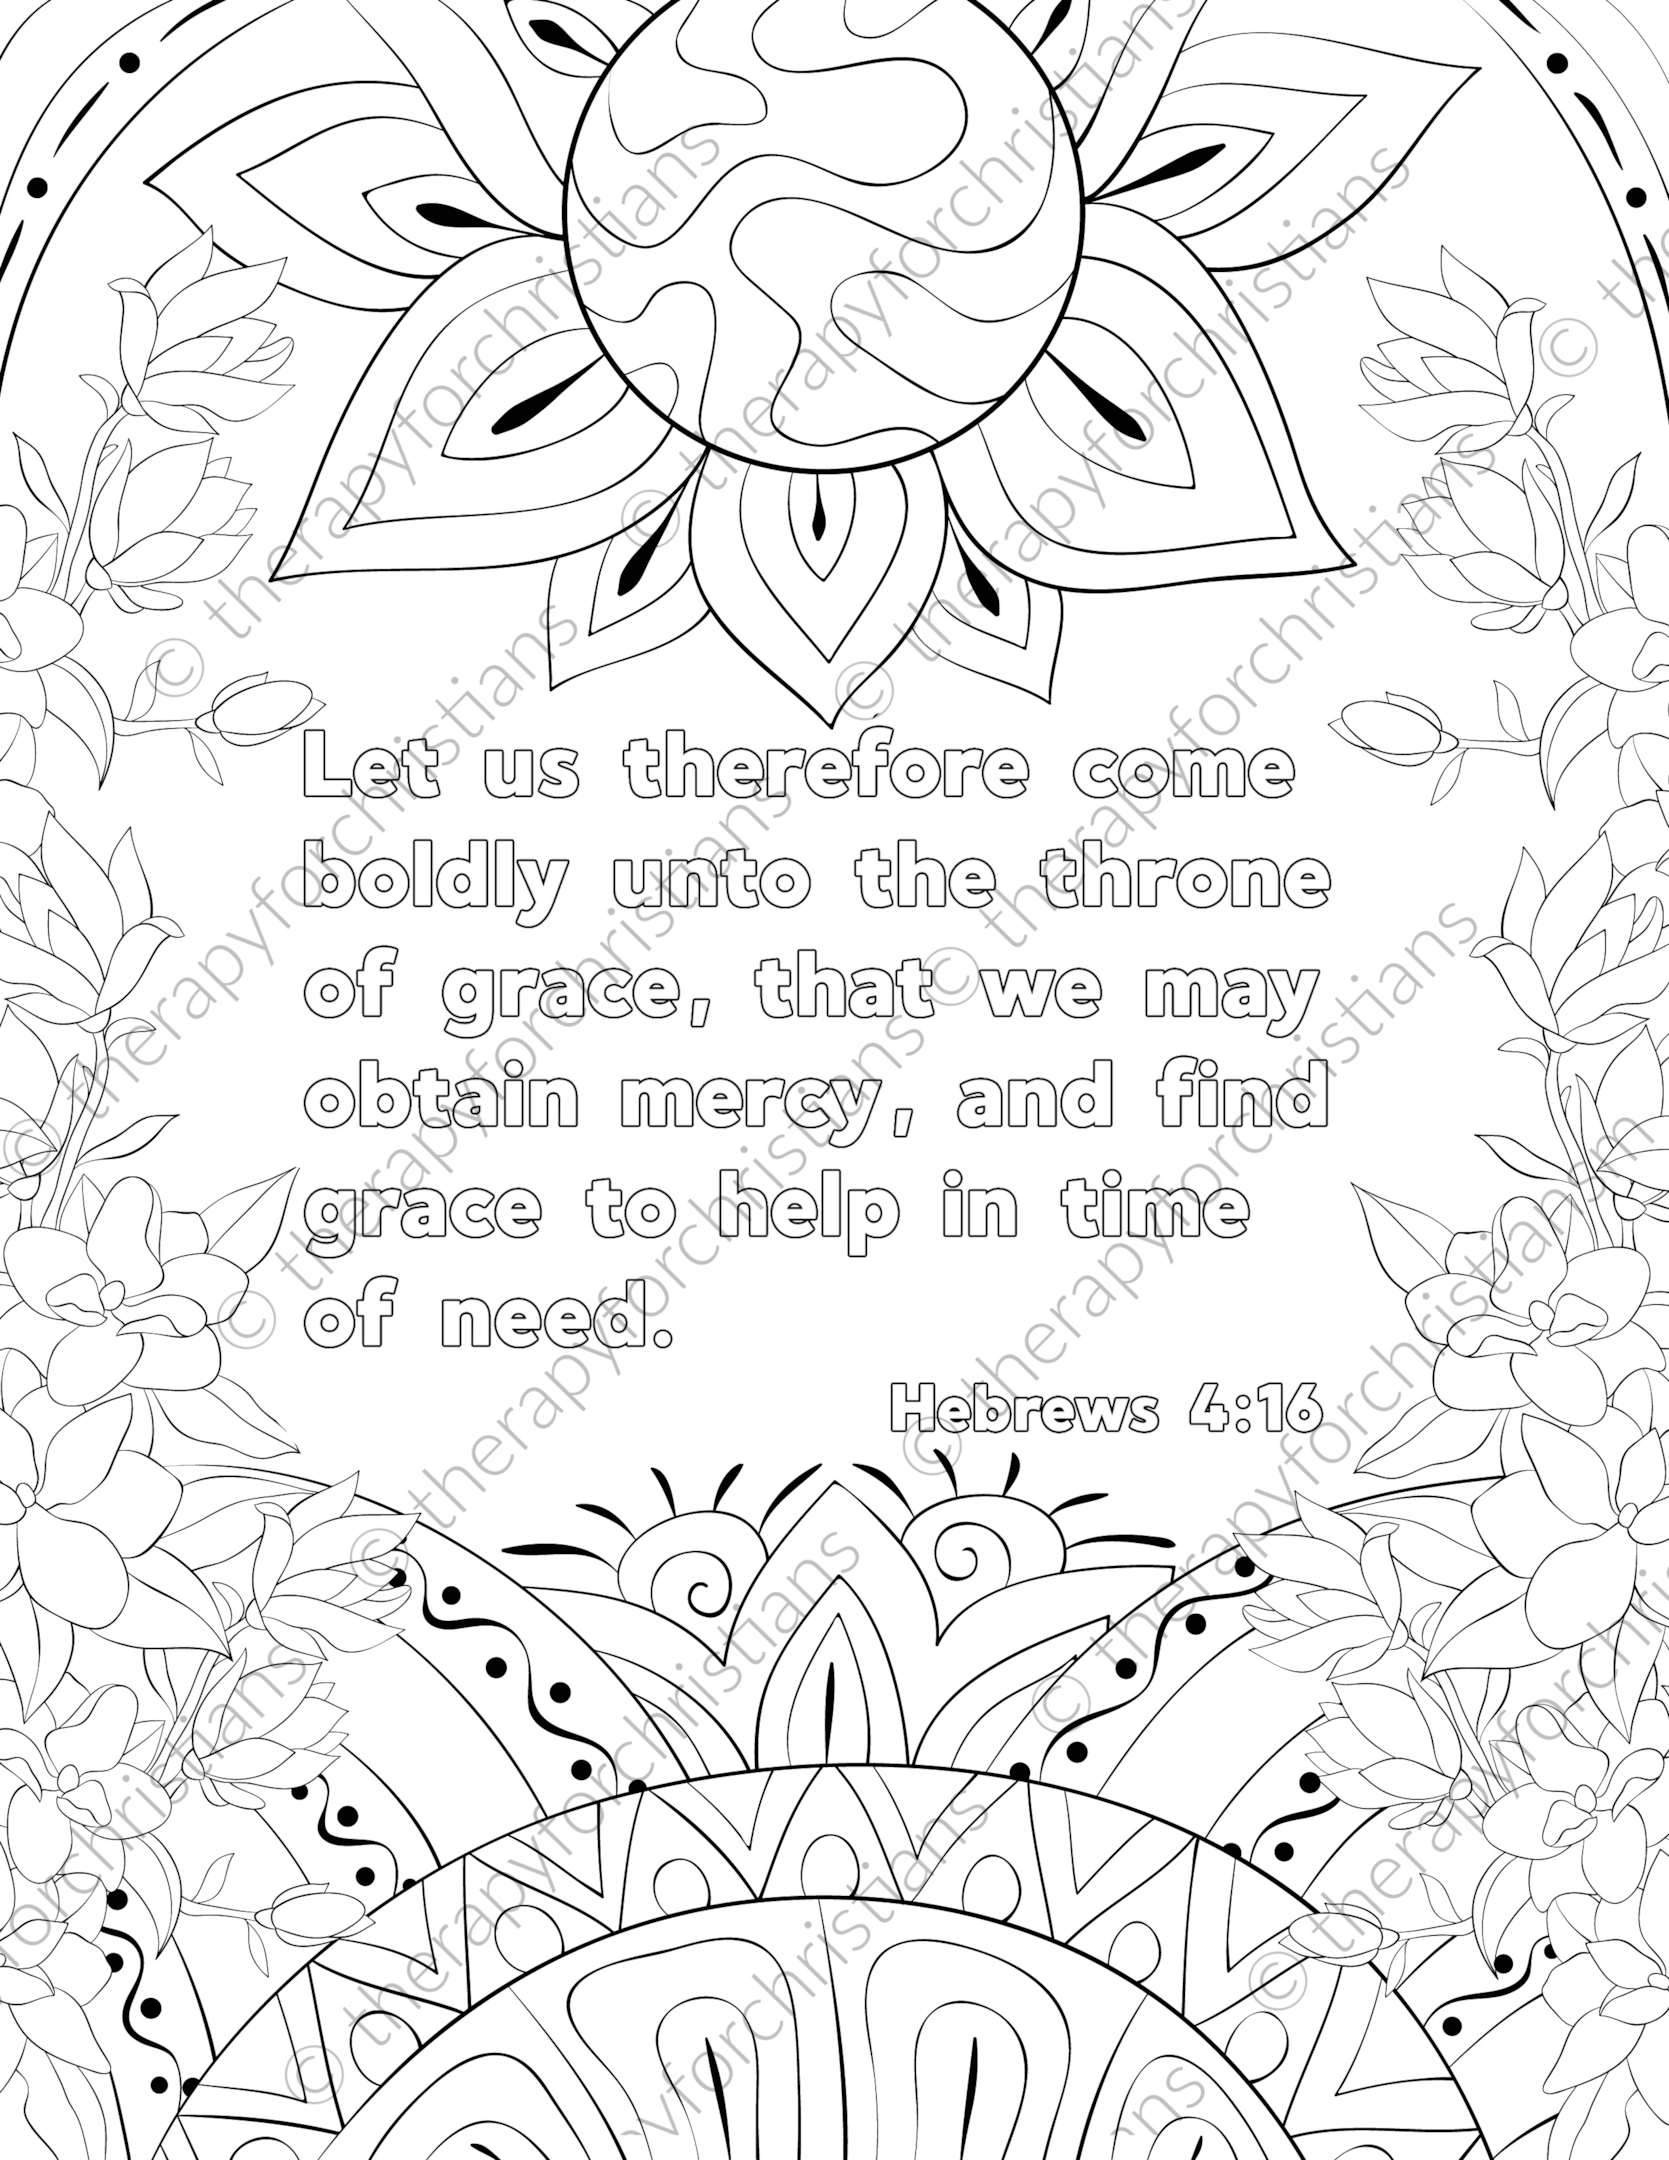 Bible verse coloring pages for adults Hebrews 4:16